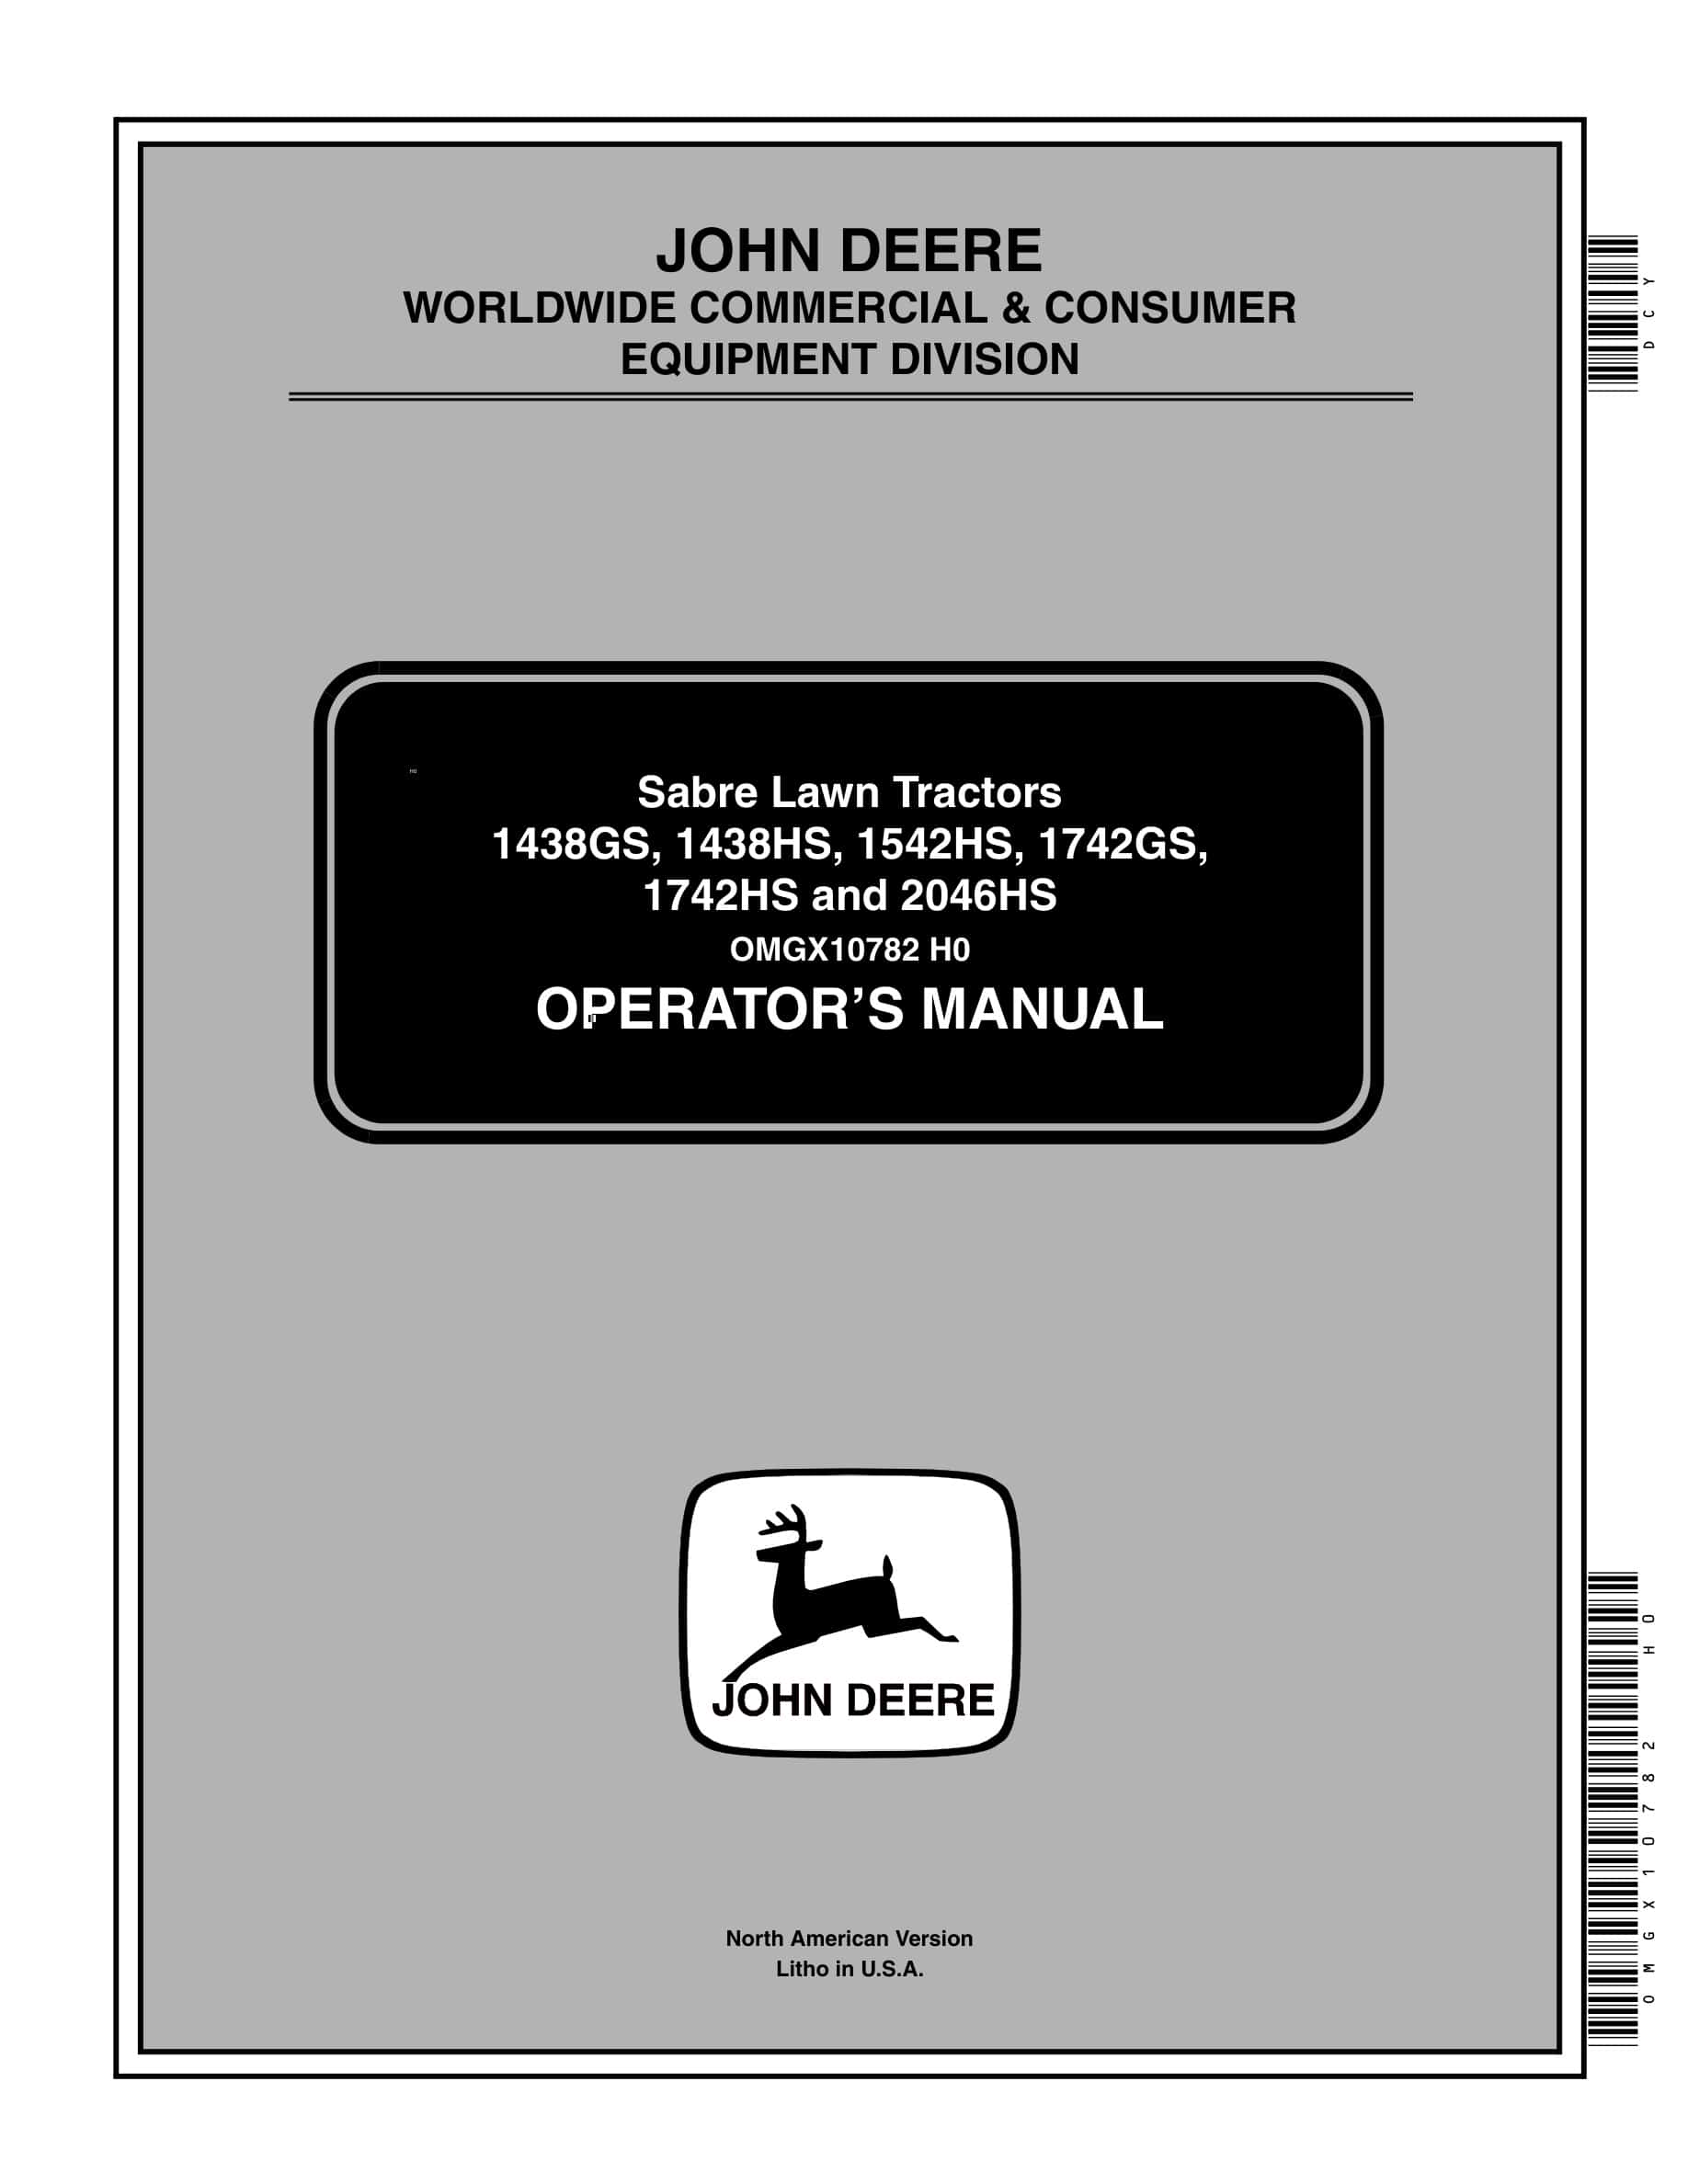 John Deere 1438GS, 1438HS, 1542HS, 1742GS, 1742HS and 2046HS Tractor Operator Manual OMGX10782-1